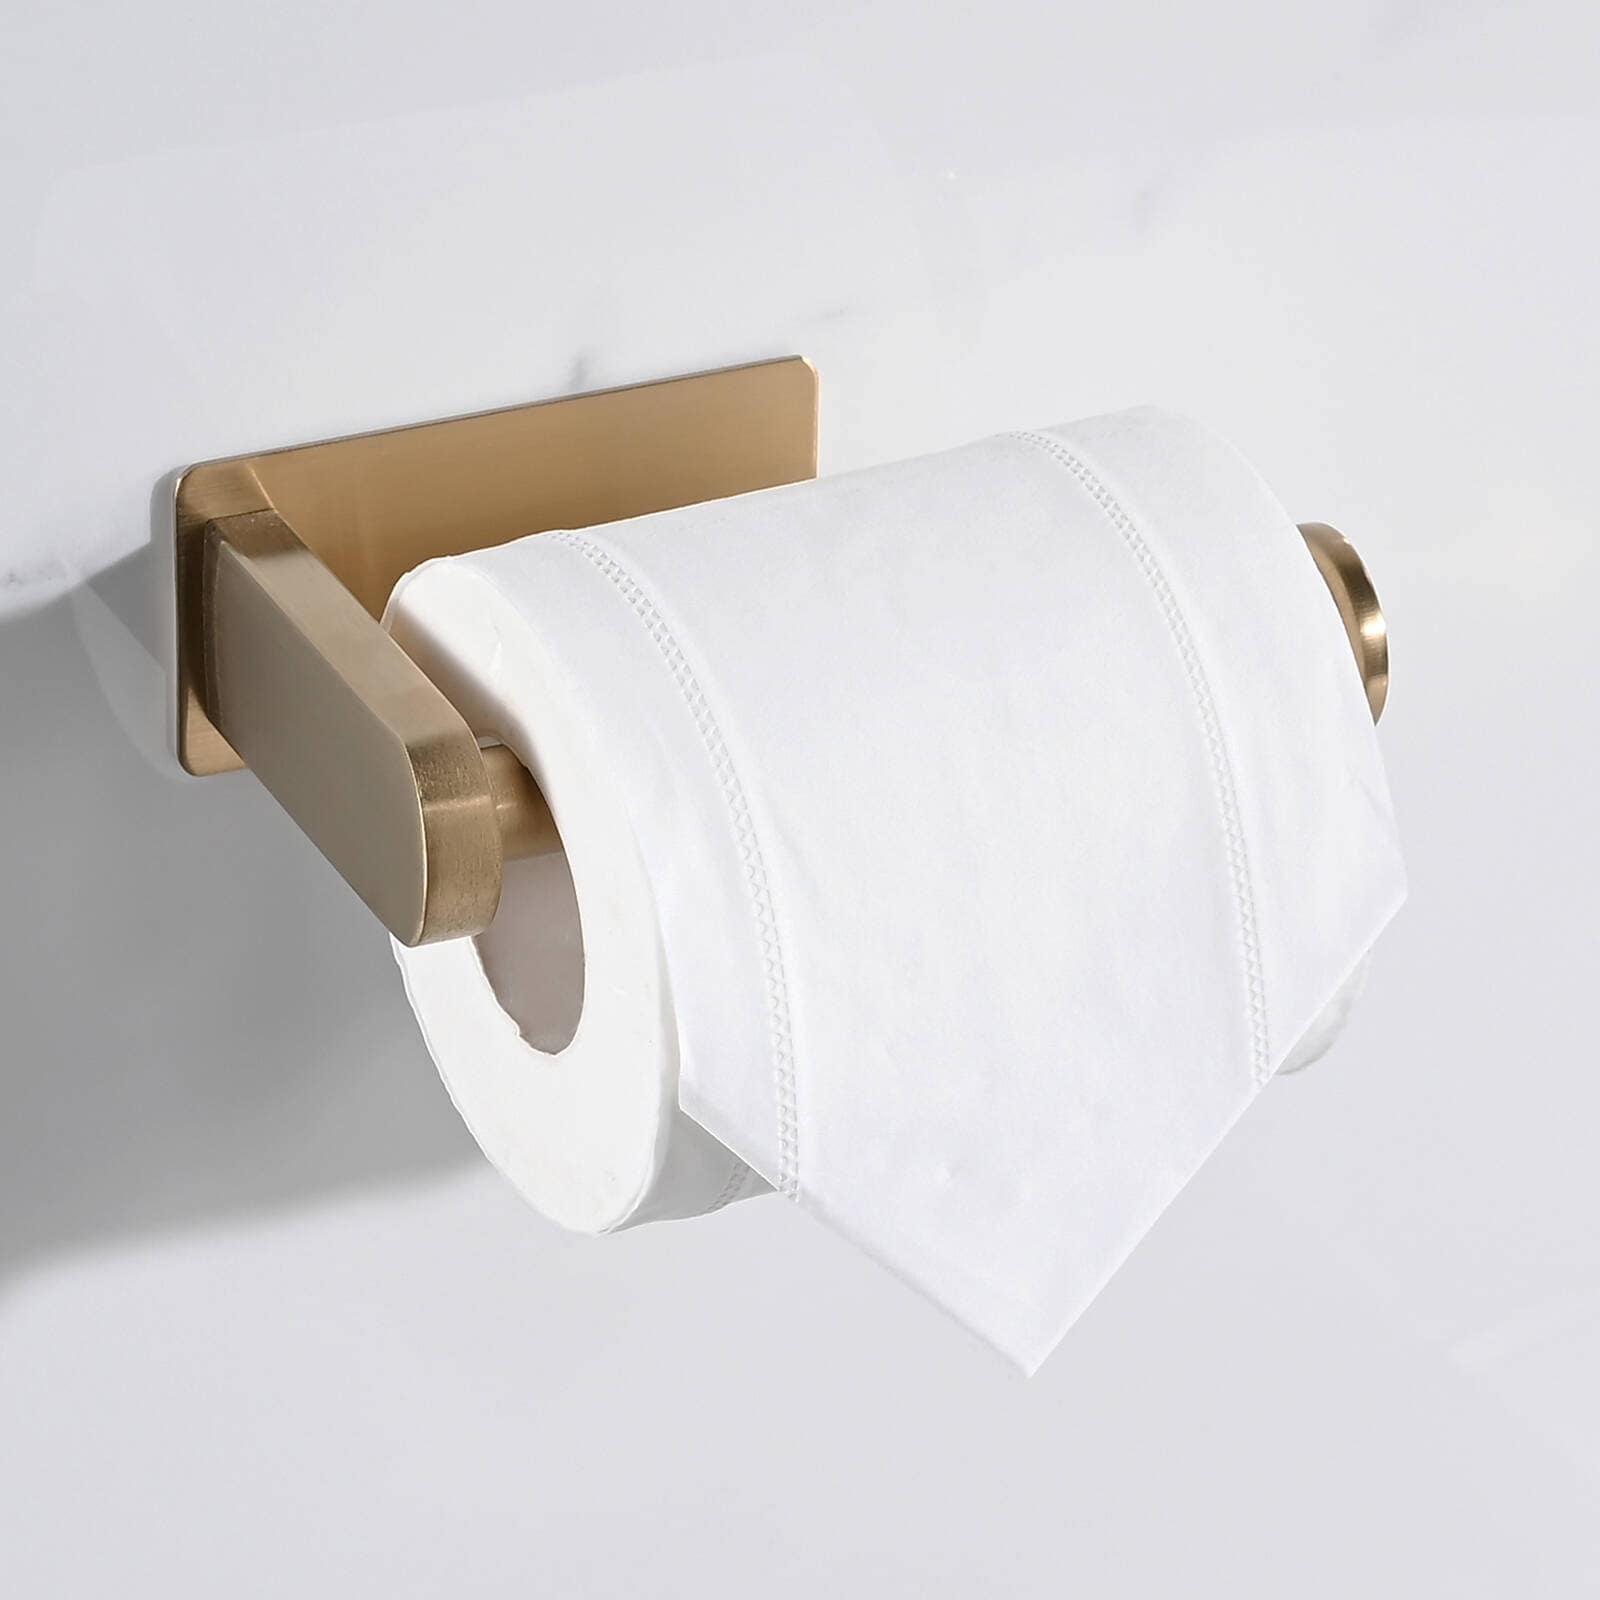 https://ak1.ostkcdn.com/images/products/is/images/direct/50329d33dd00b0c2288a92305948cd3d62929068/Dornberg-Self-Adhesive-Wall-Mounted-Toilet-Paper-Holder.jpg